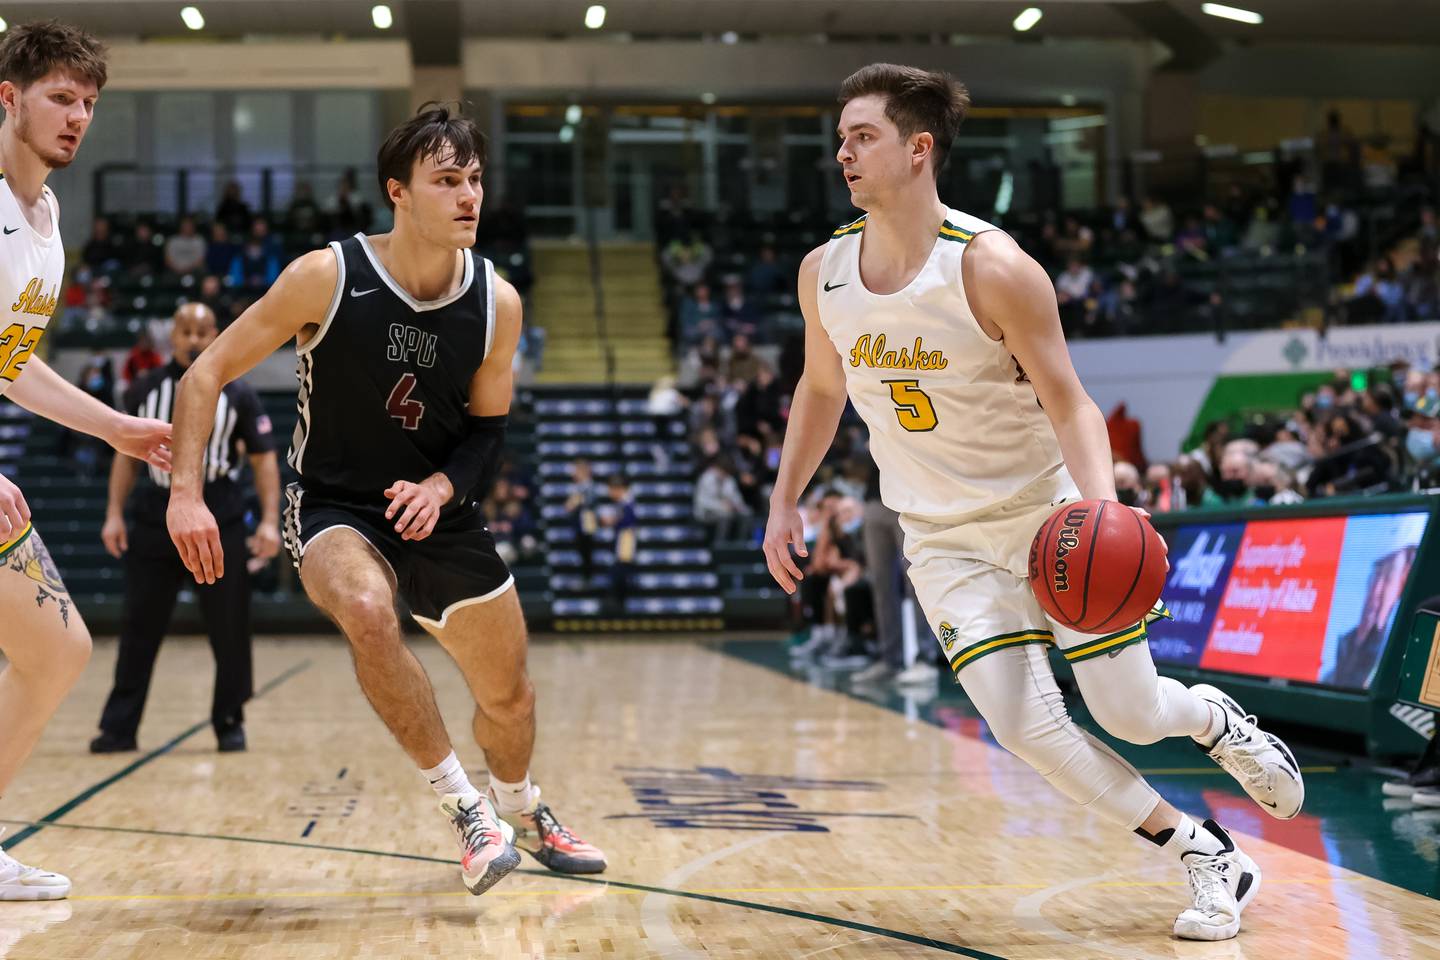 UAA's AJ Garrity drives to the basket against Seattle Pacific